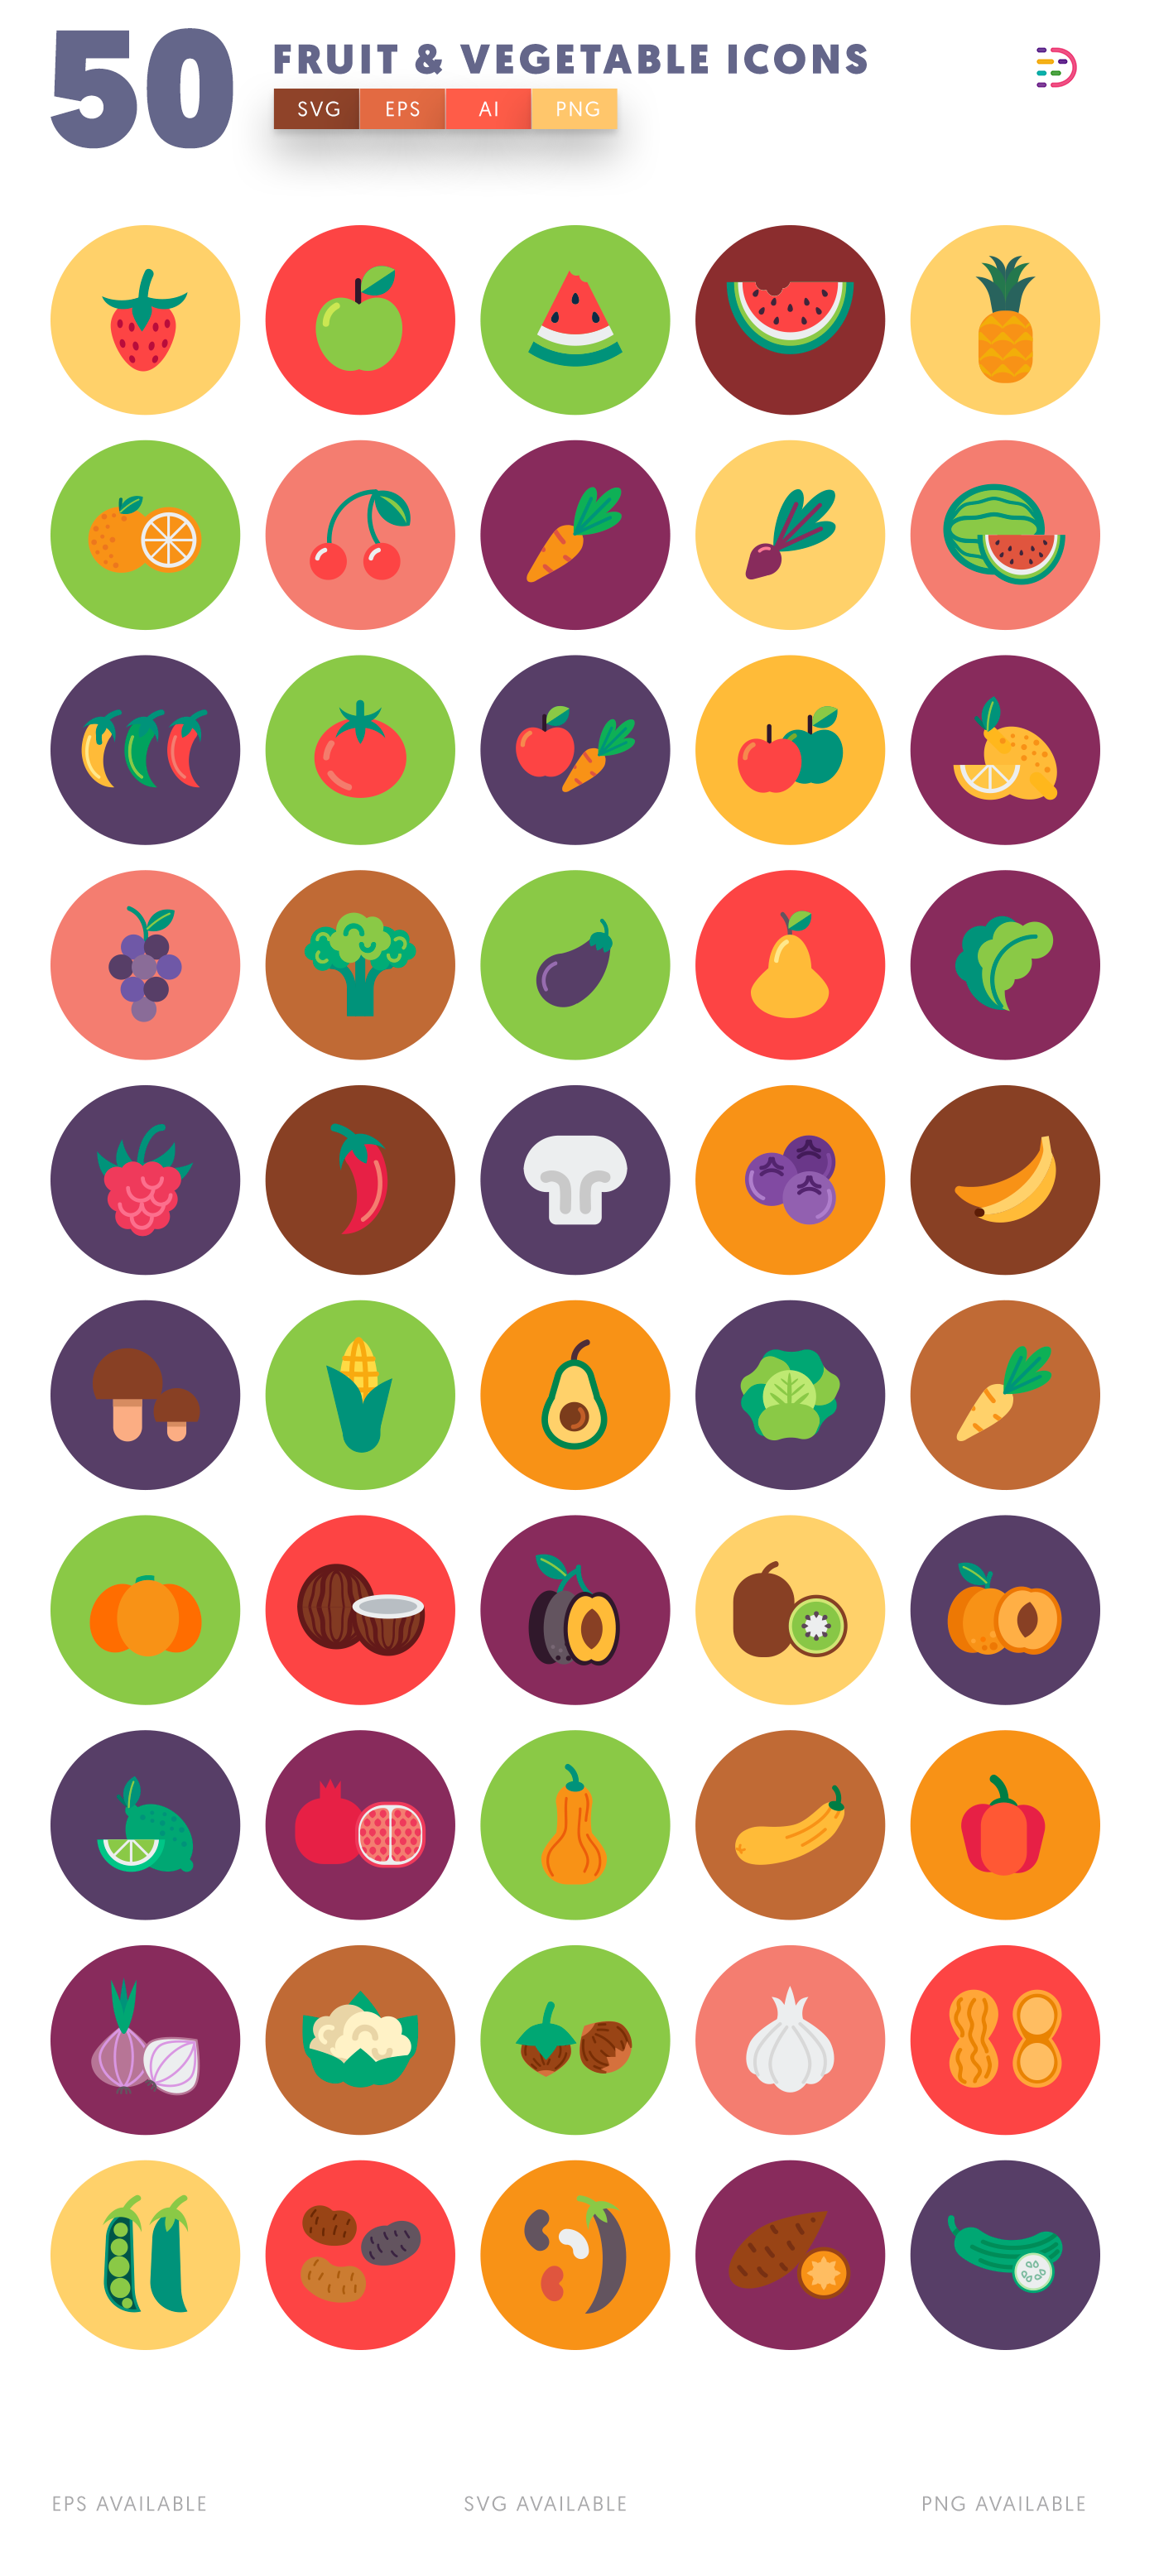 Design ready 50 Fruits & Vegetable Icons